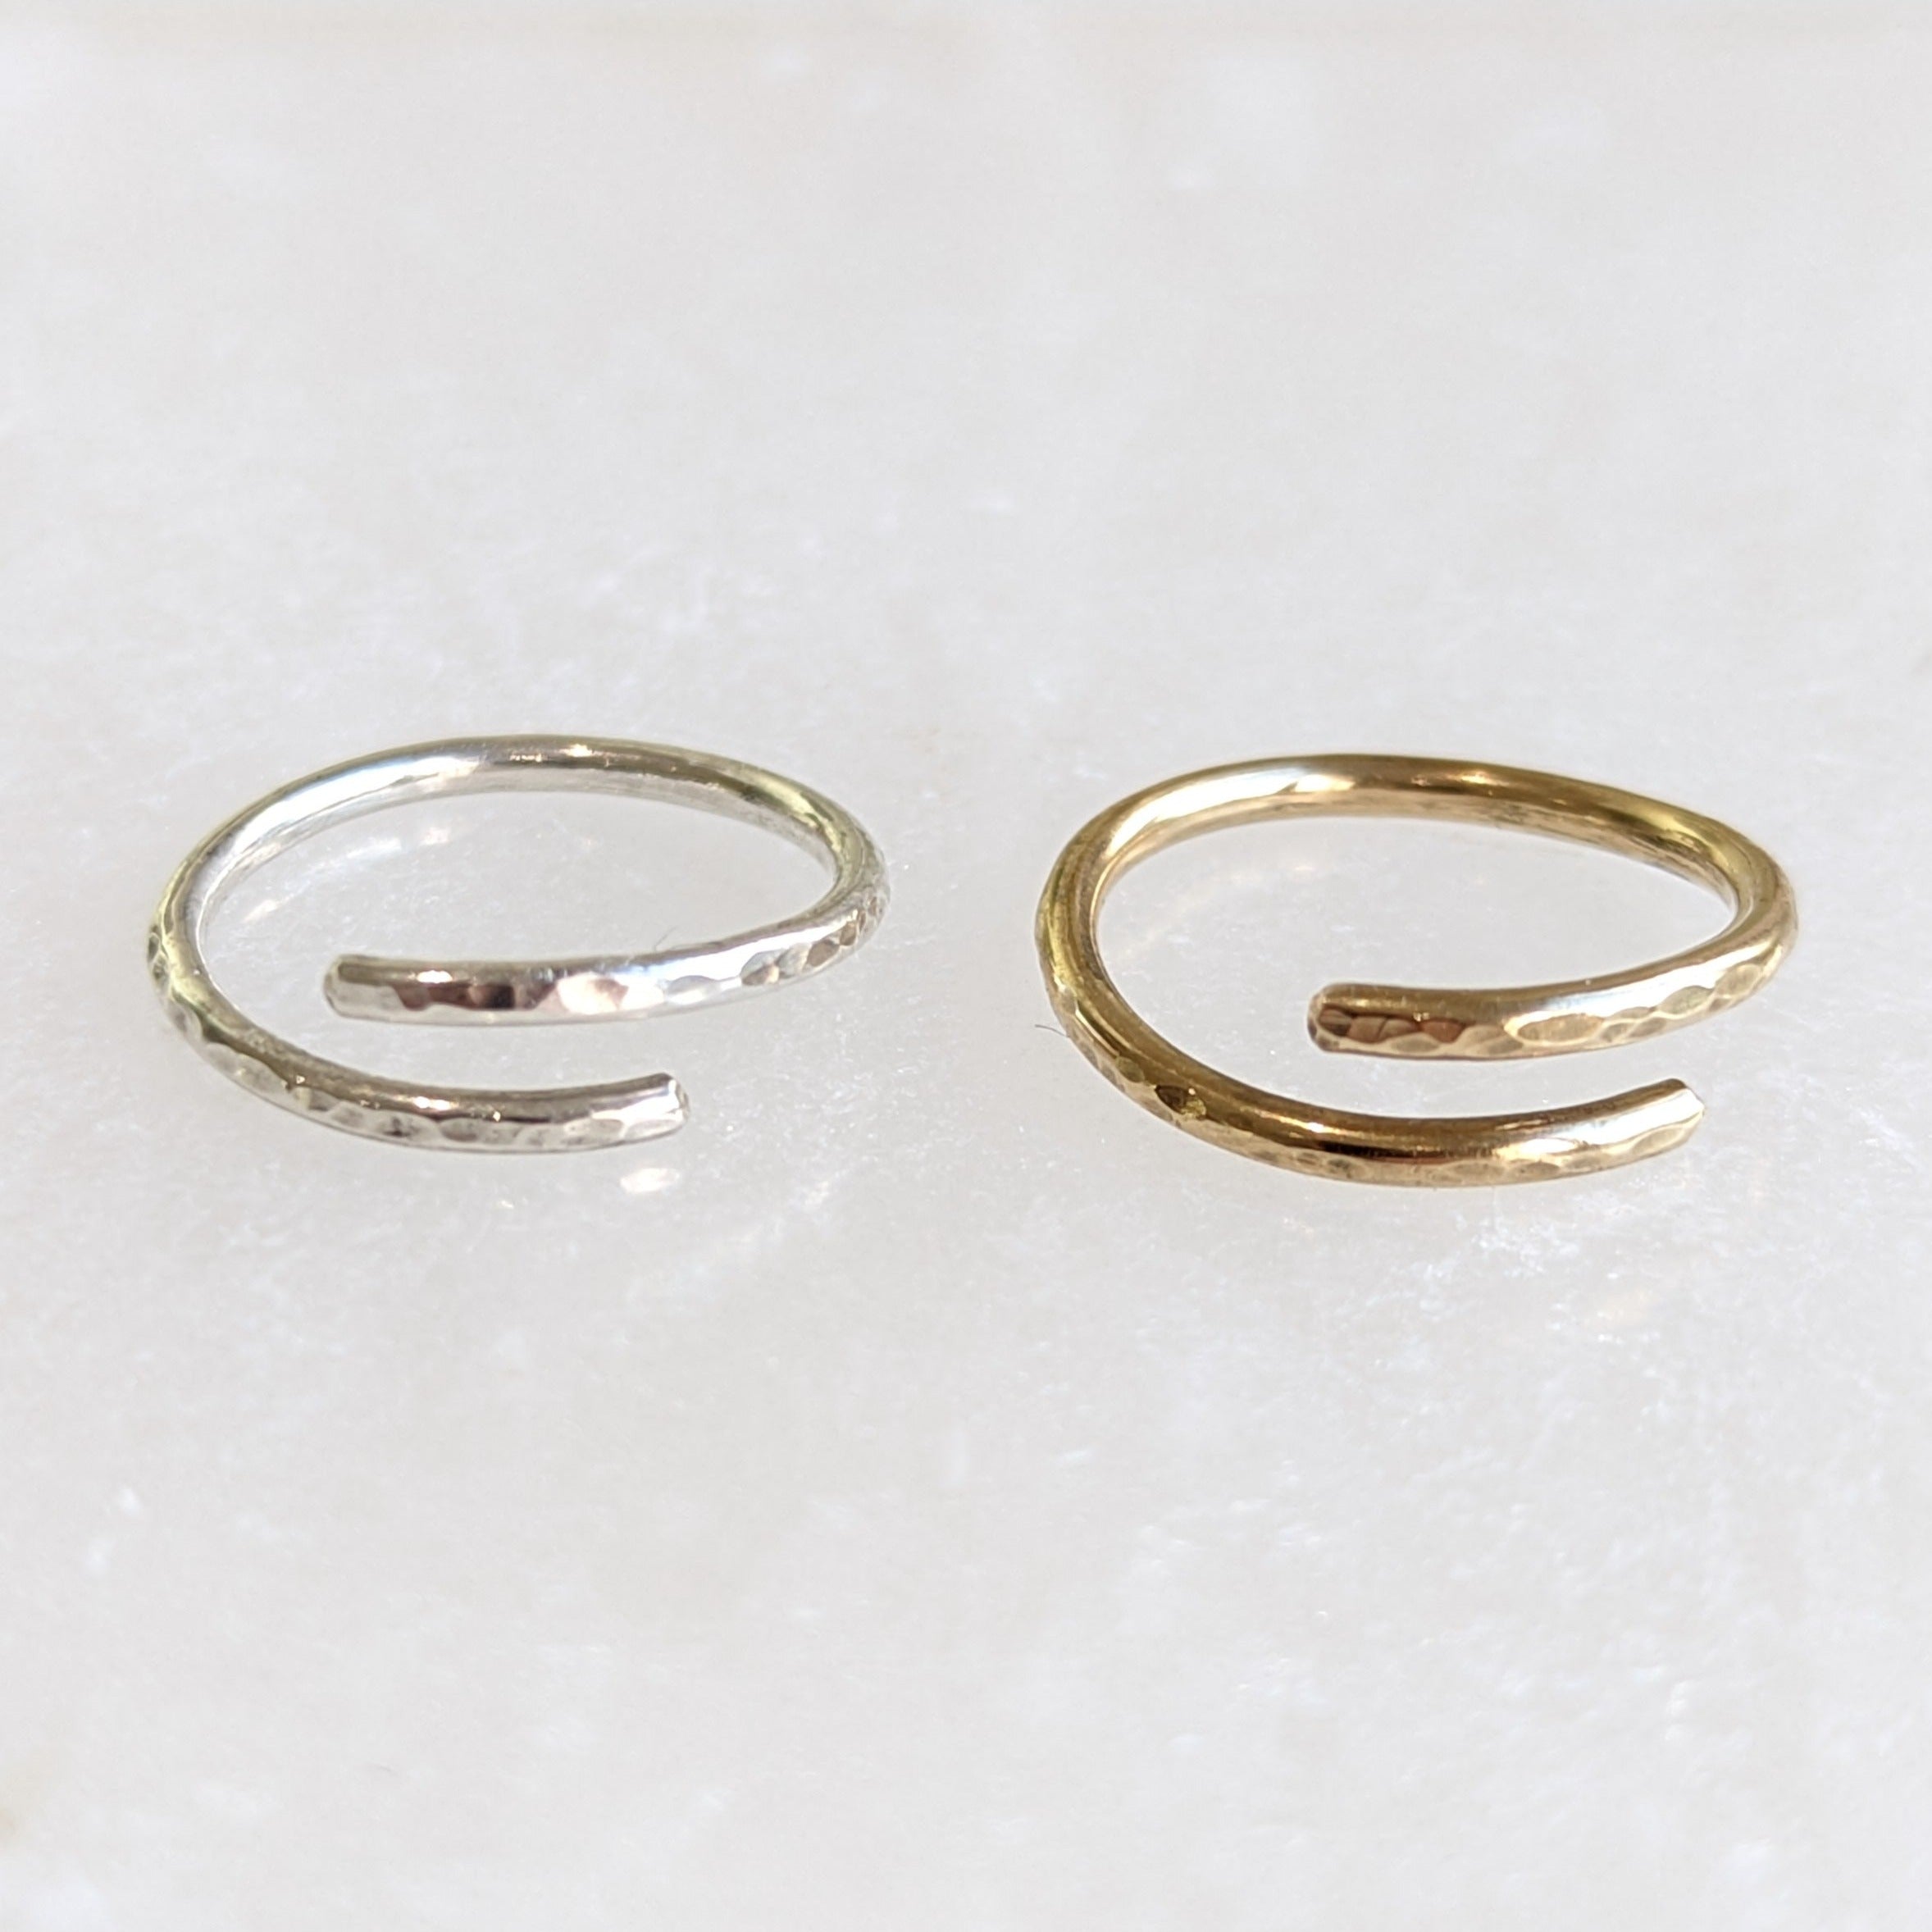 Silver and gold adjustable hammered rings